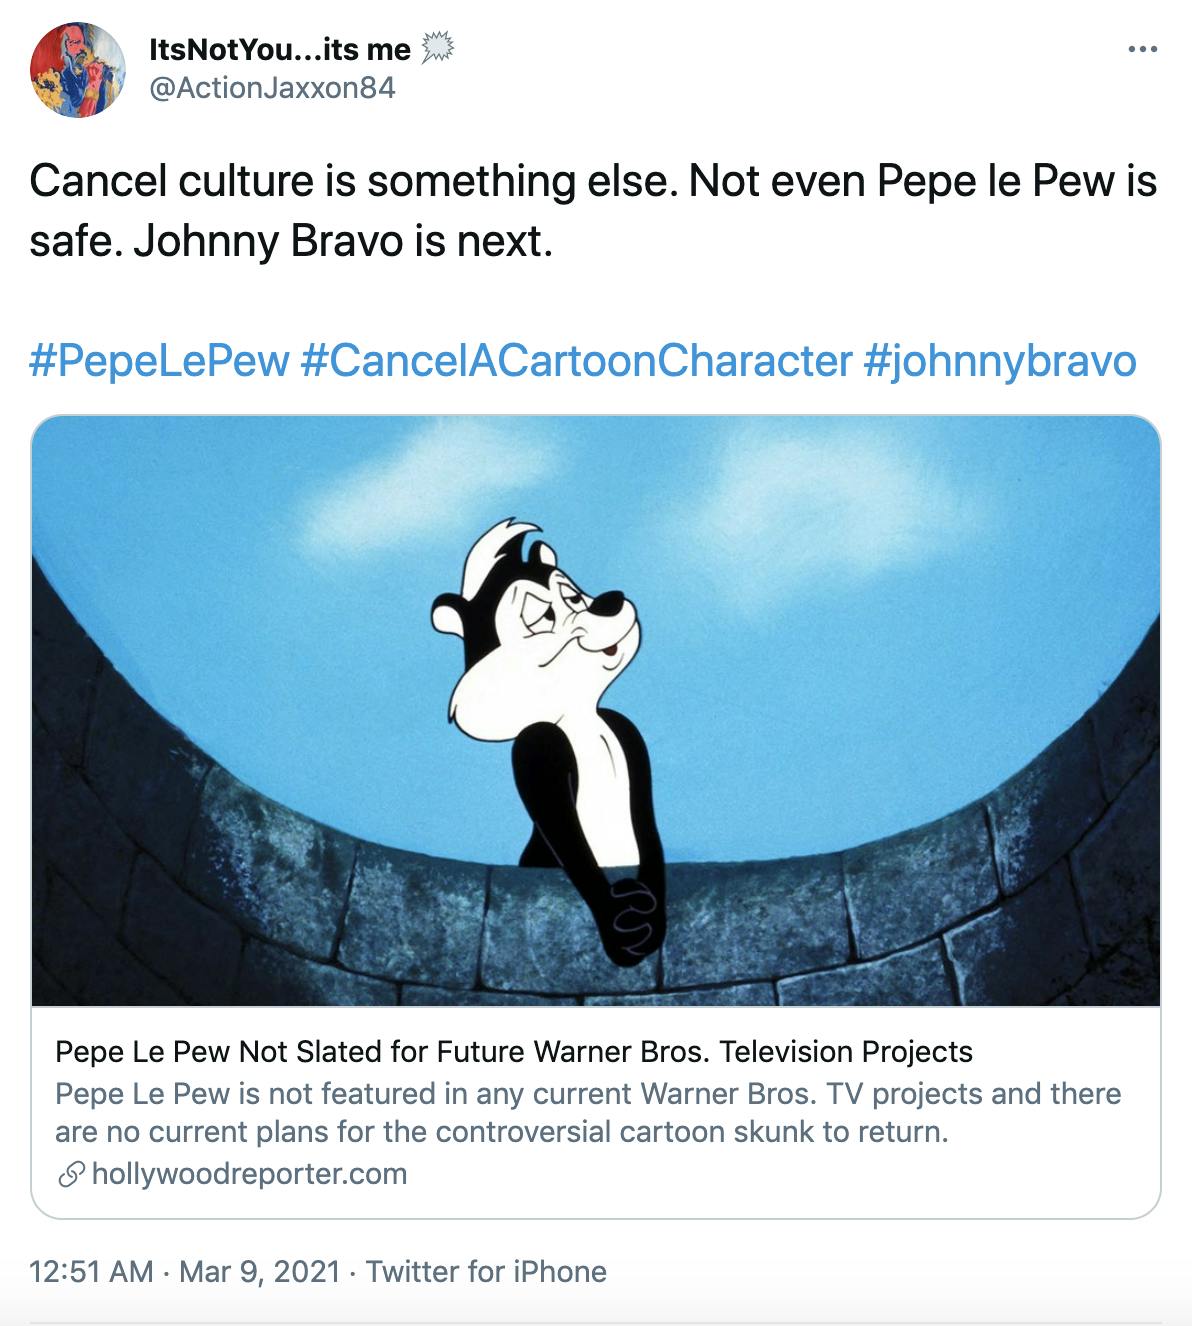 Cancel culture is something else. Not even Pepe le Pew is safe. Johnny Bravo is next. #PepeLePew #CancelACartoonCharacter #johnnybravo